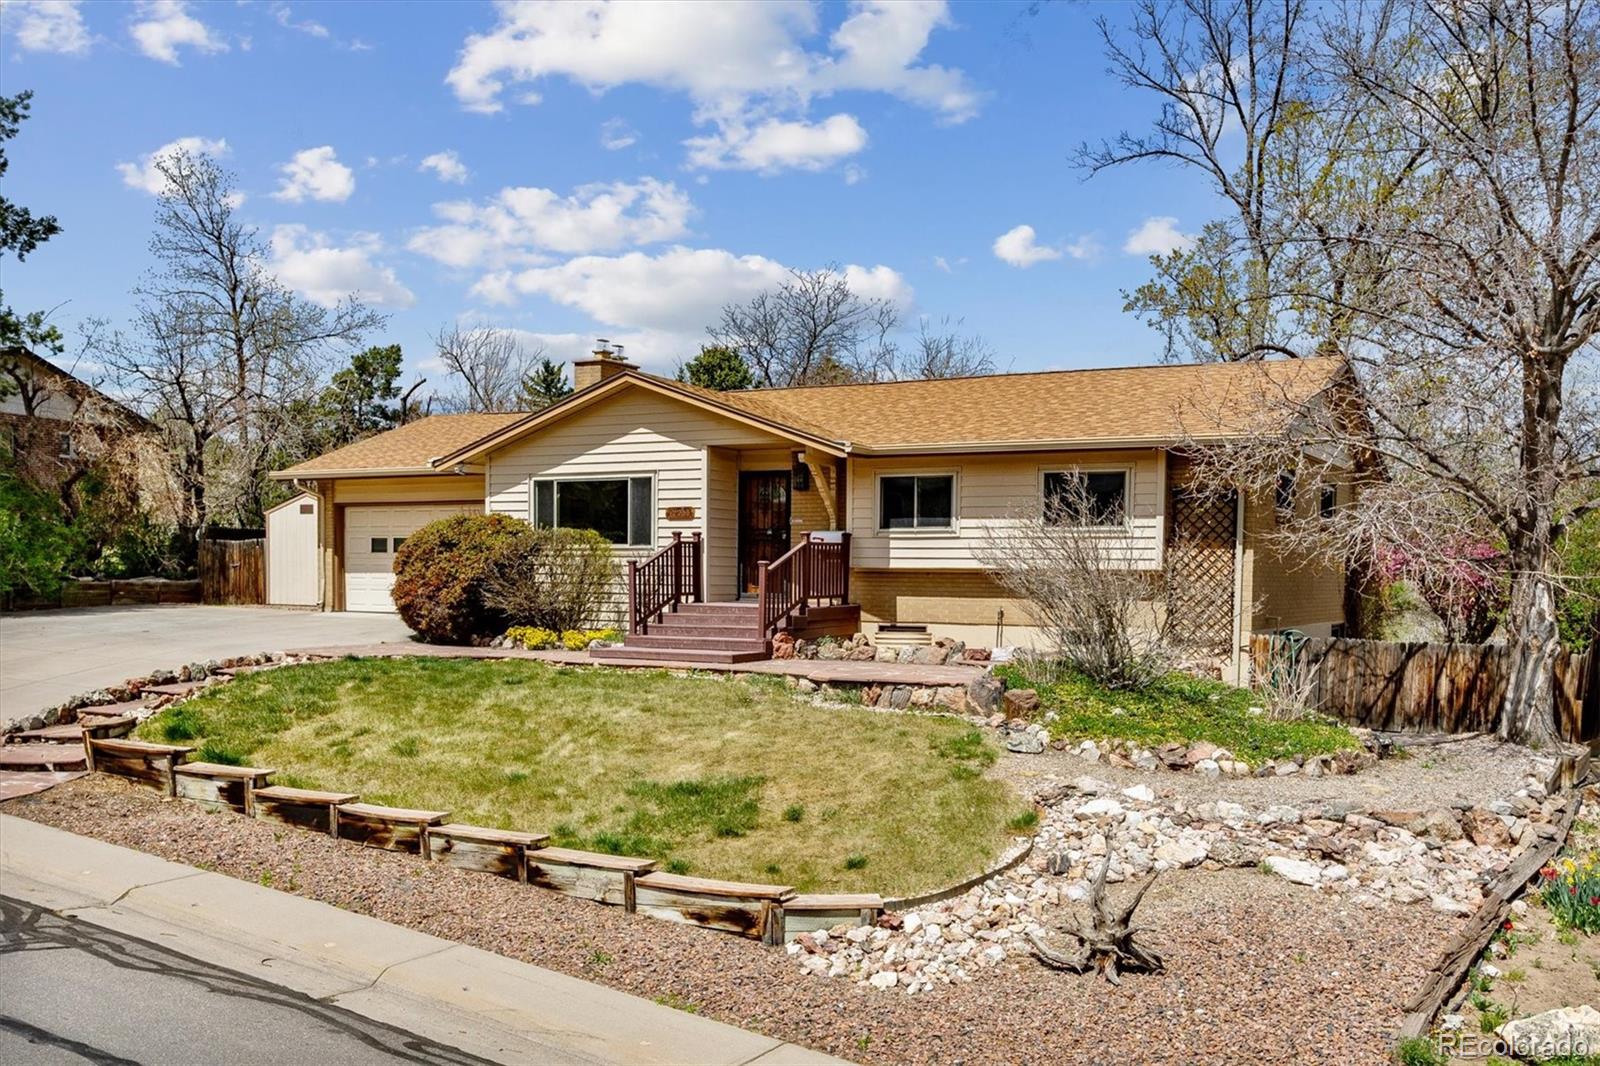 CMA Image for 12281 w exposition drive,Lakewood, Colorado